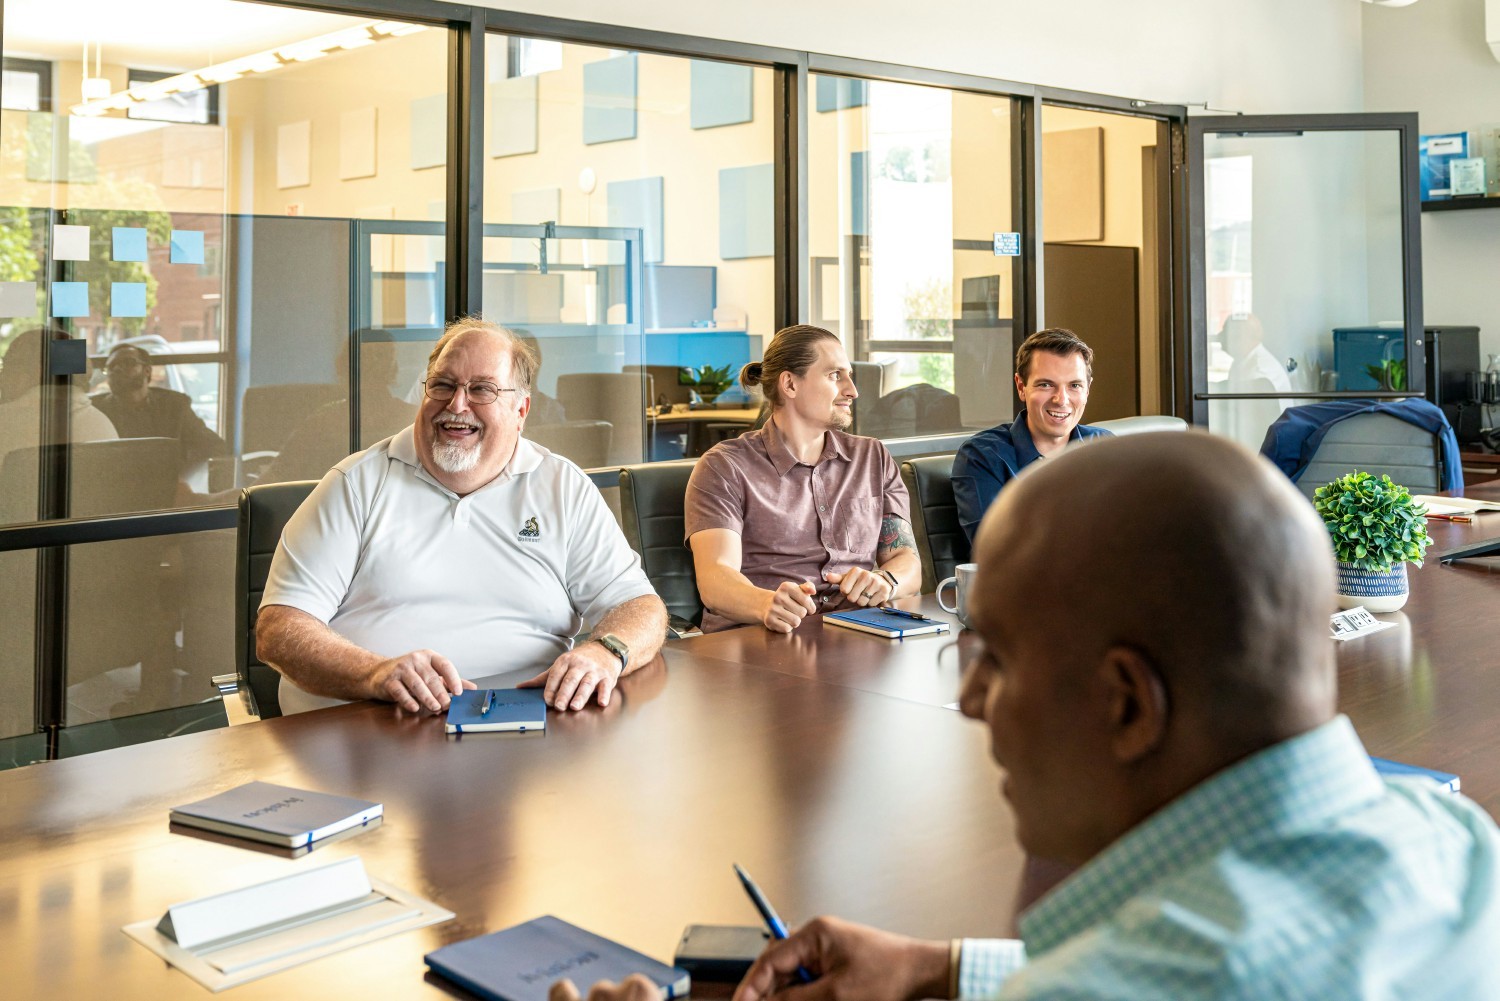 Team members laugh during an internal meeting at our Pittsburgh office.